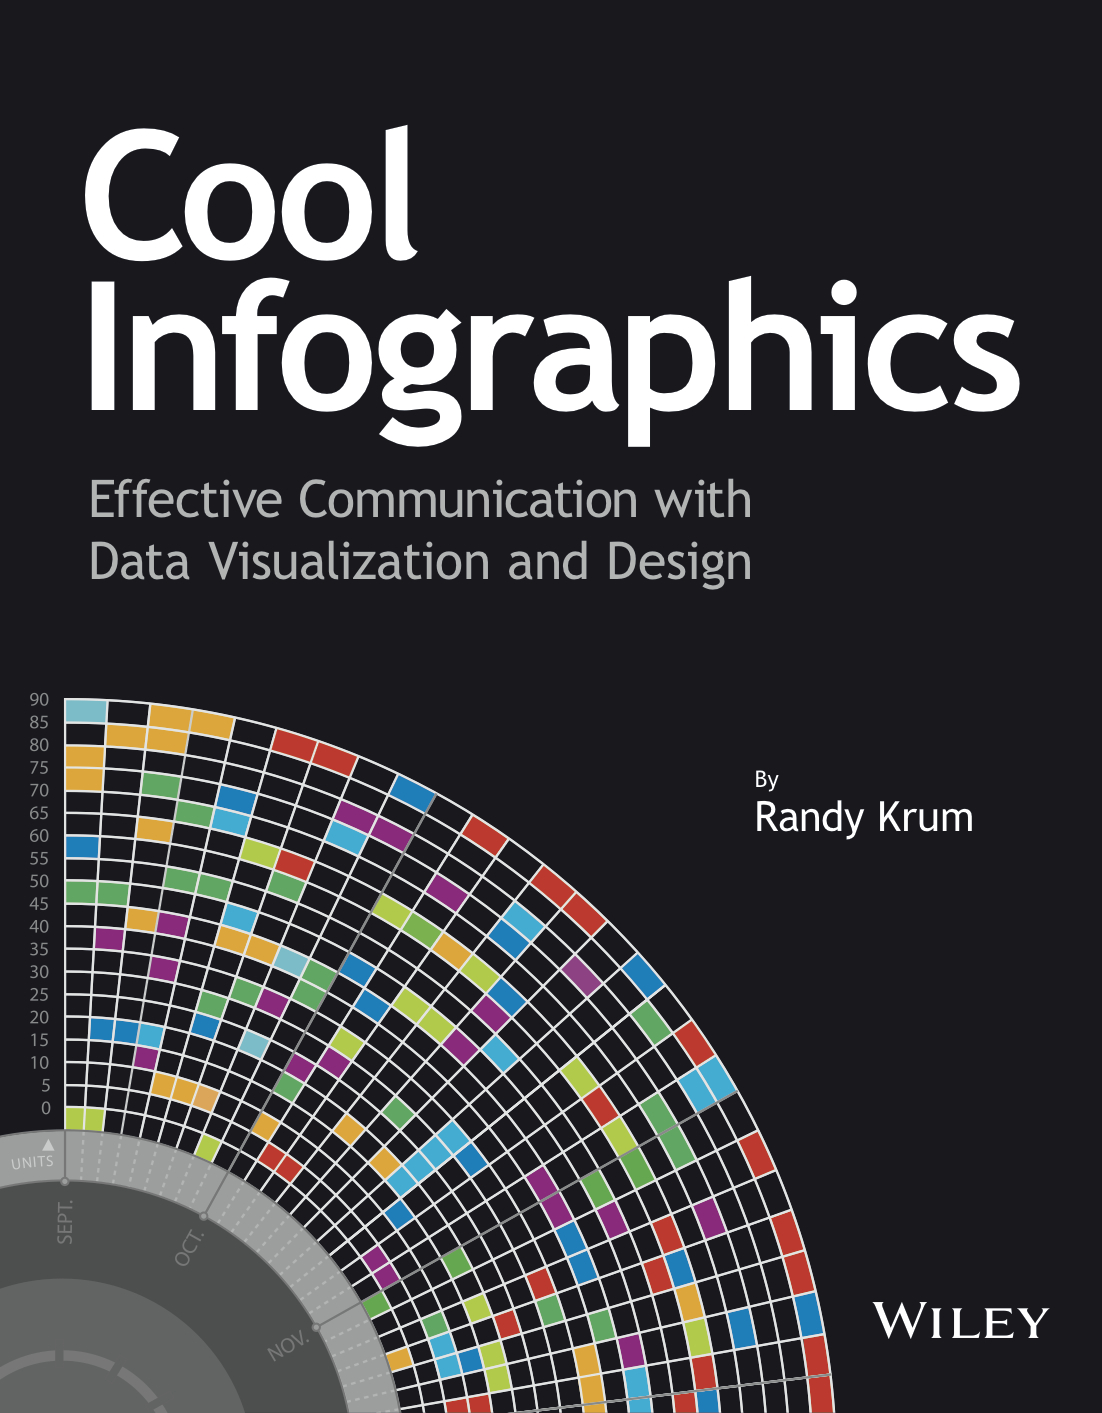 Cool Infographics book now available in print and ebook